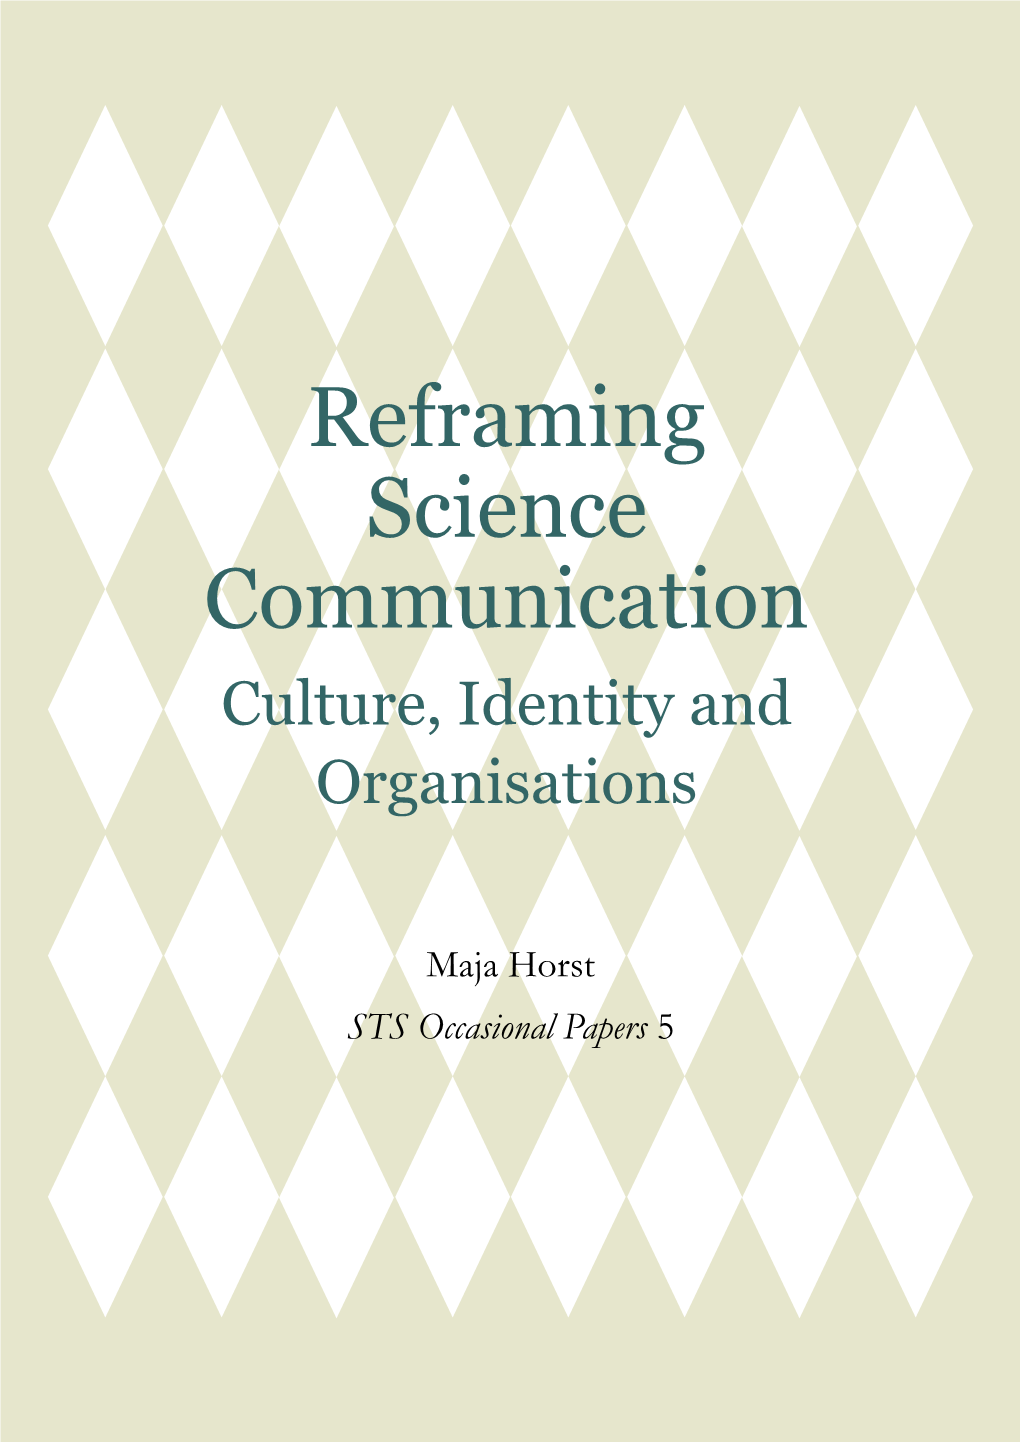 Reframing Science Communication Culture, Identity and Organisations